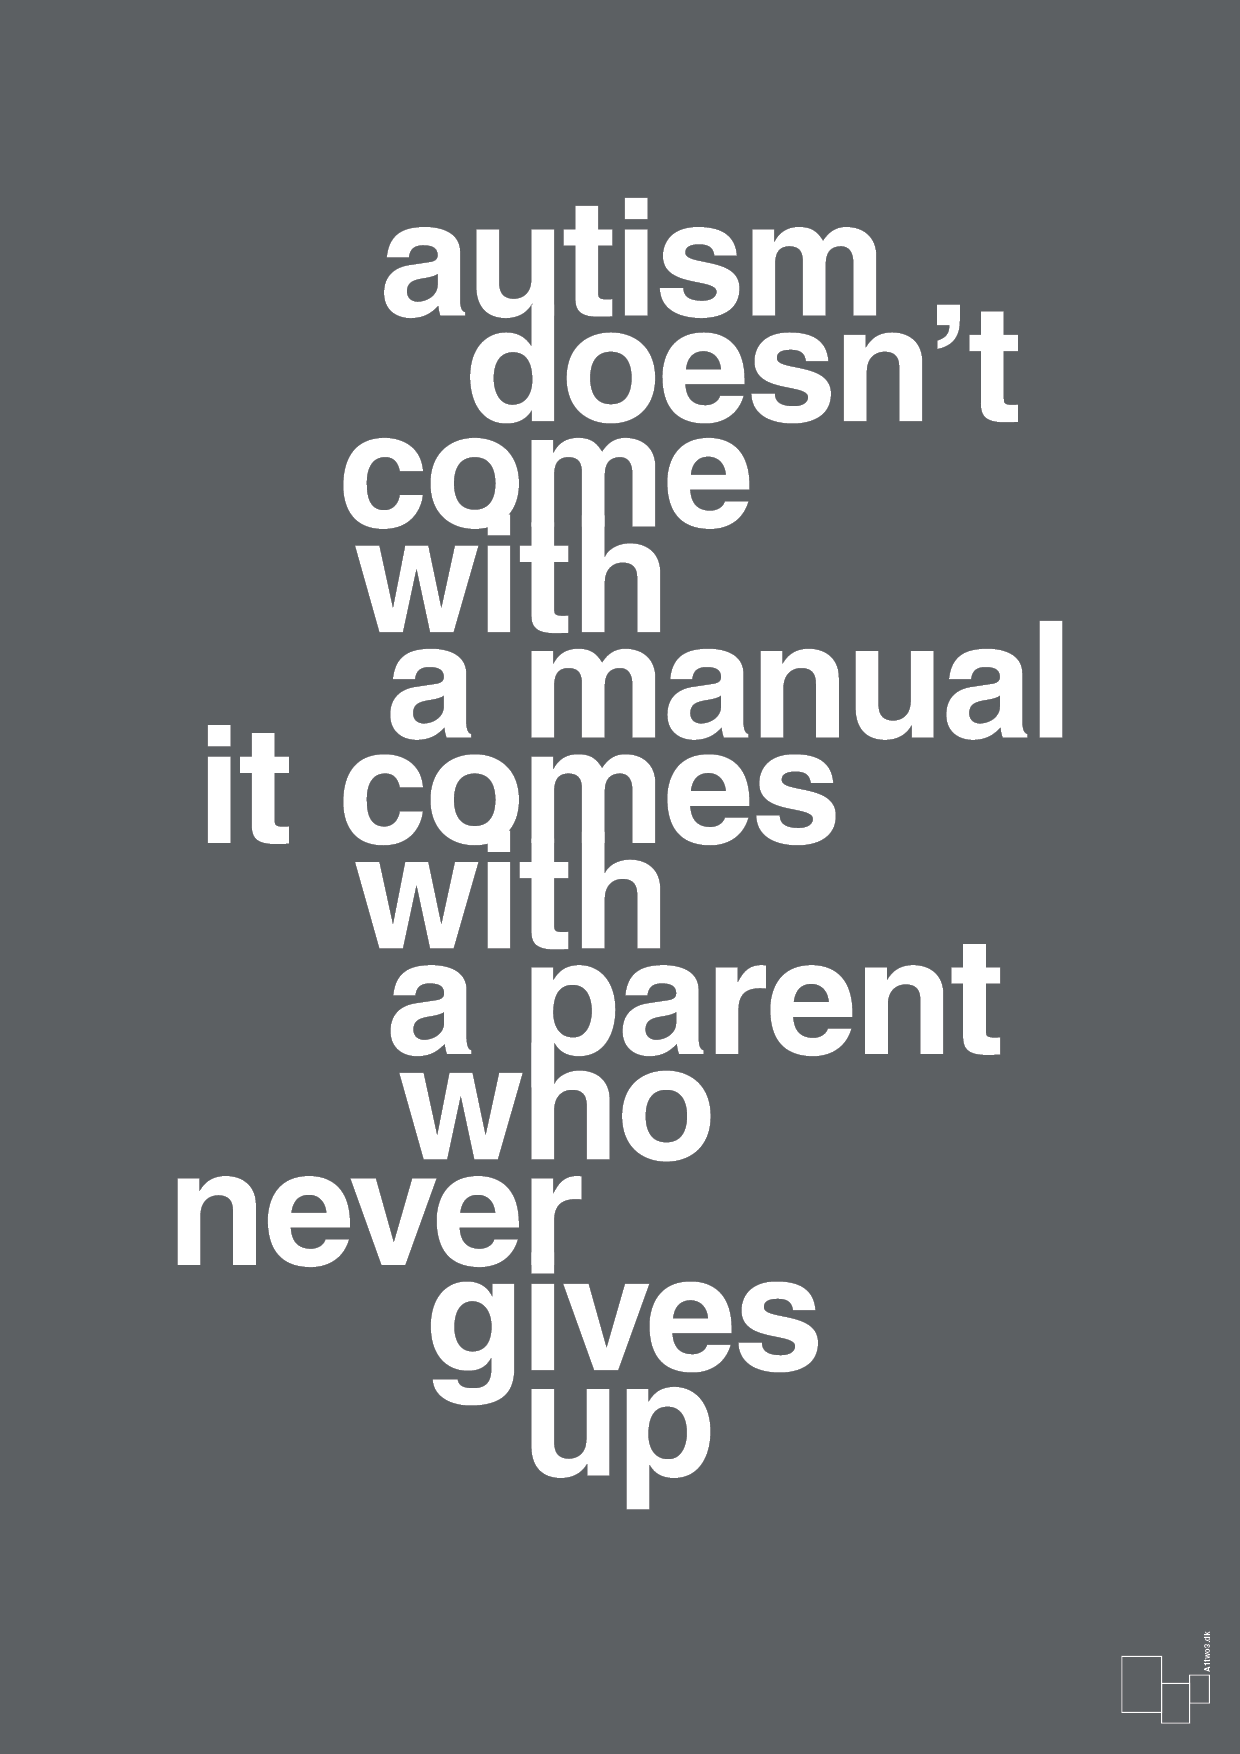 autism doesnt come with a manual it comes with a parent who never gives up - Plakat med Samfund i Graphic Charcoal